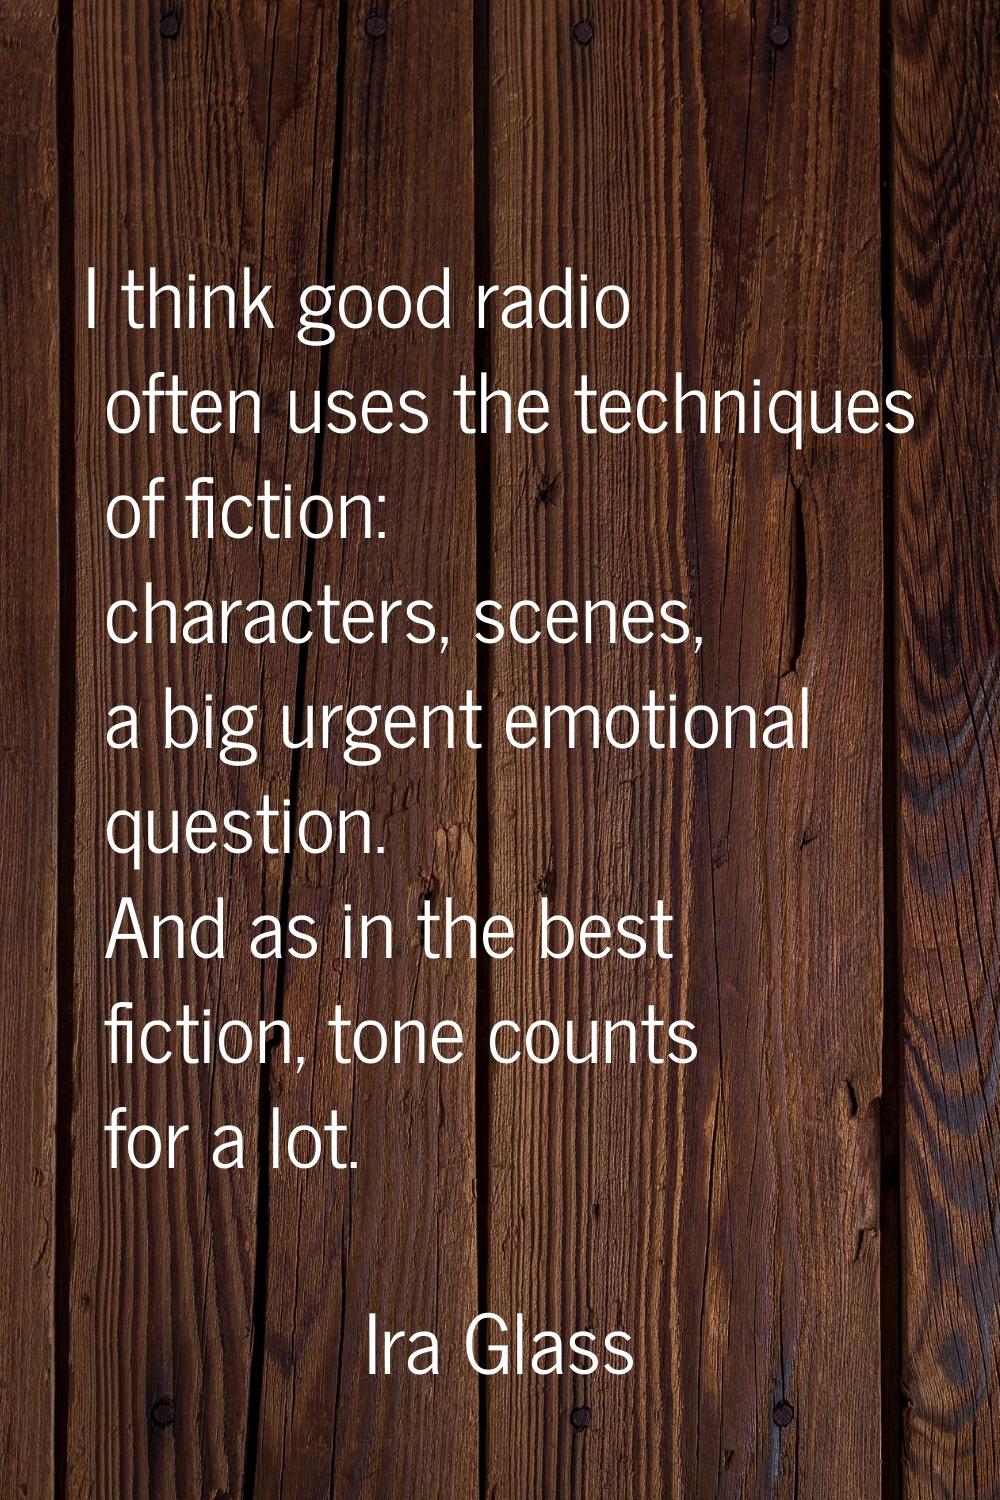 I think good radio often uses the techniques of fiction: characters, scenes, a big urgent emotional